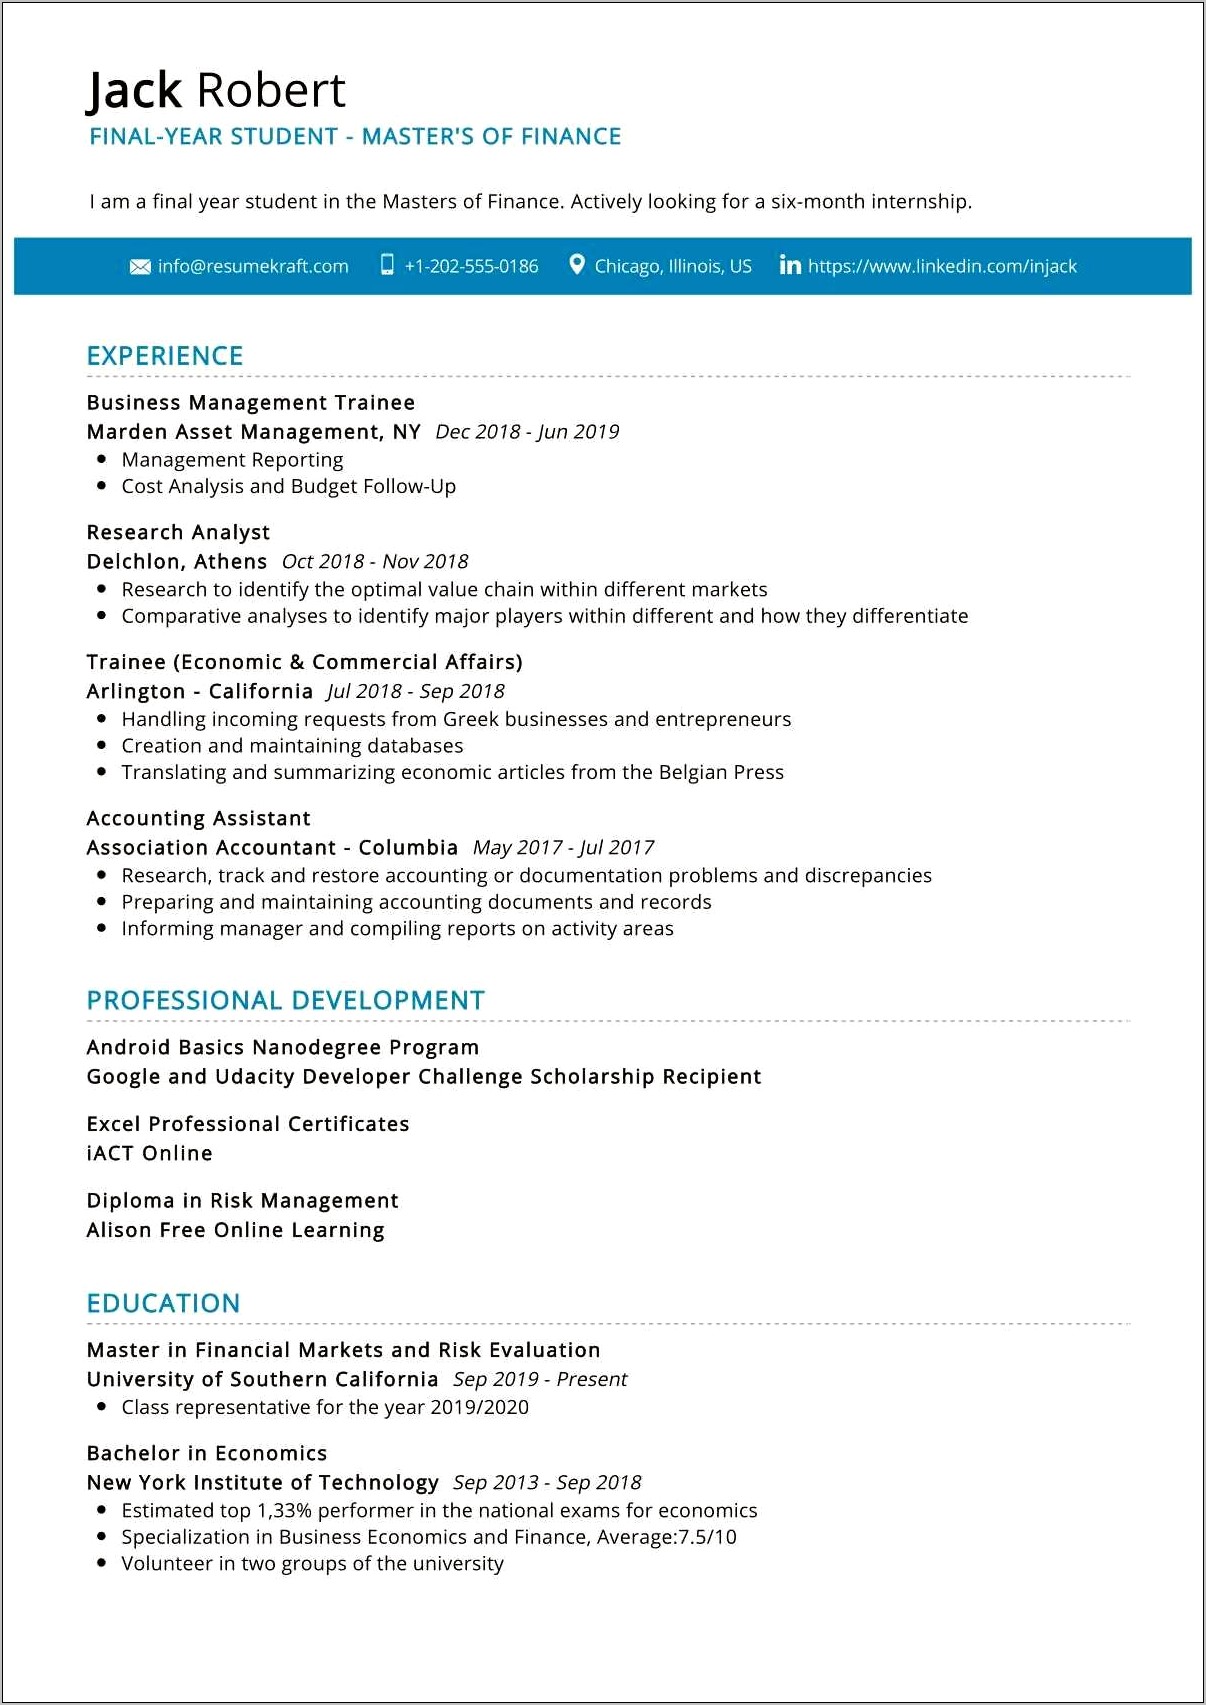 Sample Resume Summary For College Students